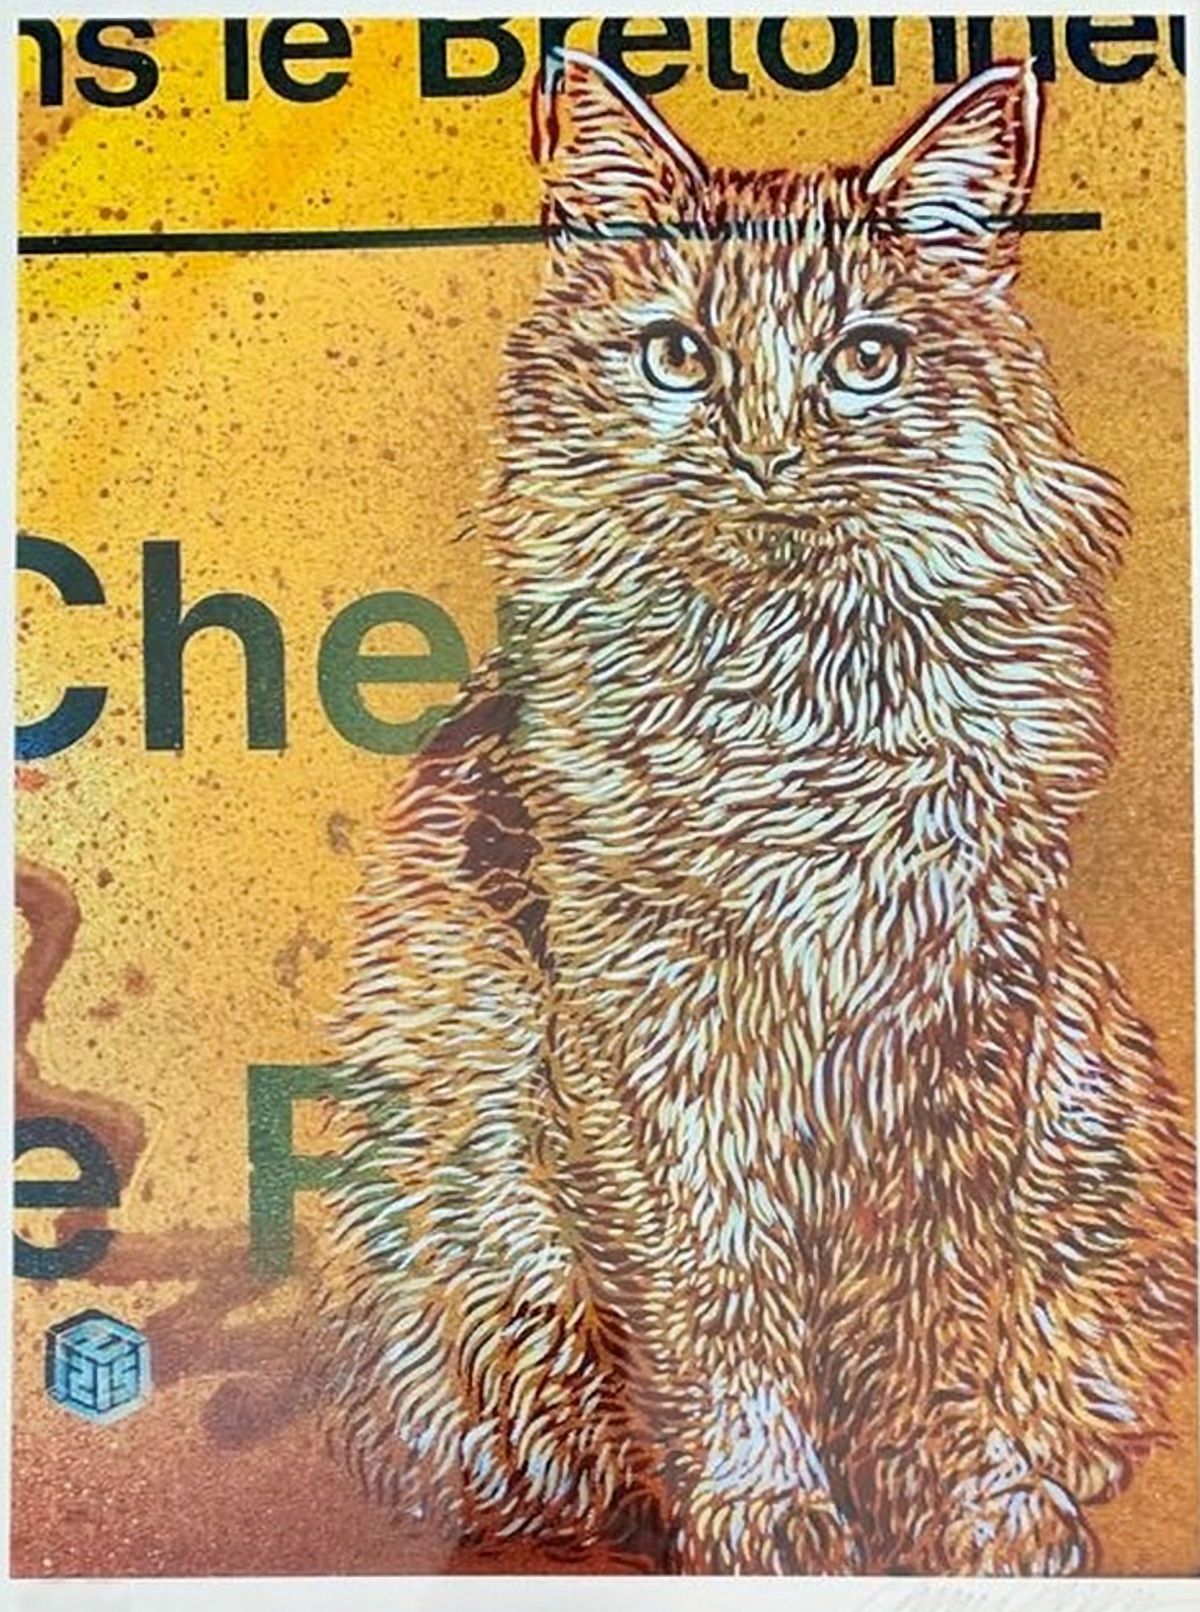 C215 C215

Minet, 2020

Digital print on canson paper.

Signed by C215 - E.A. (A&hellip;